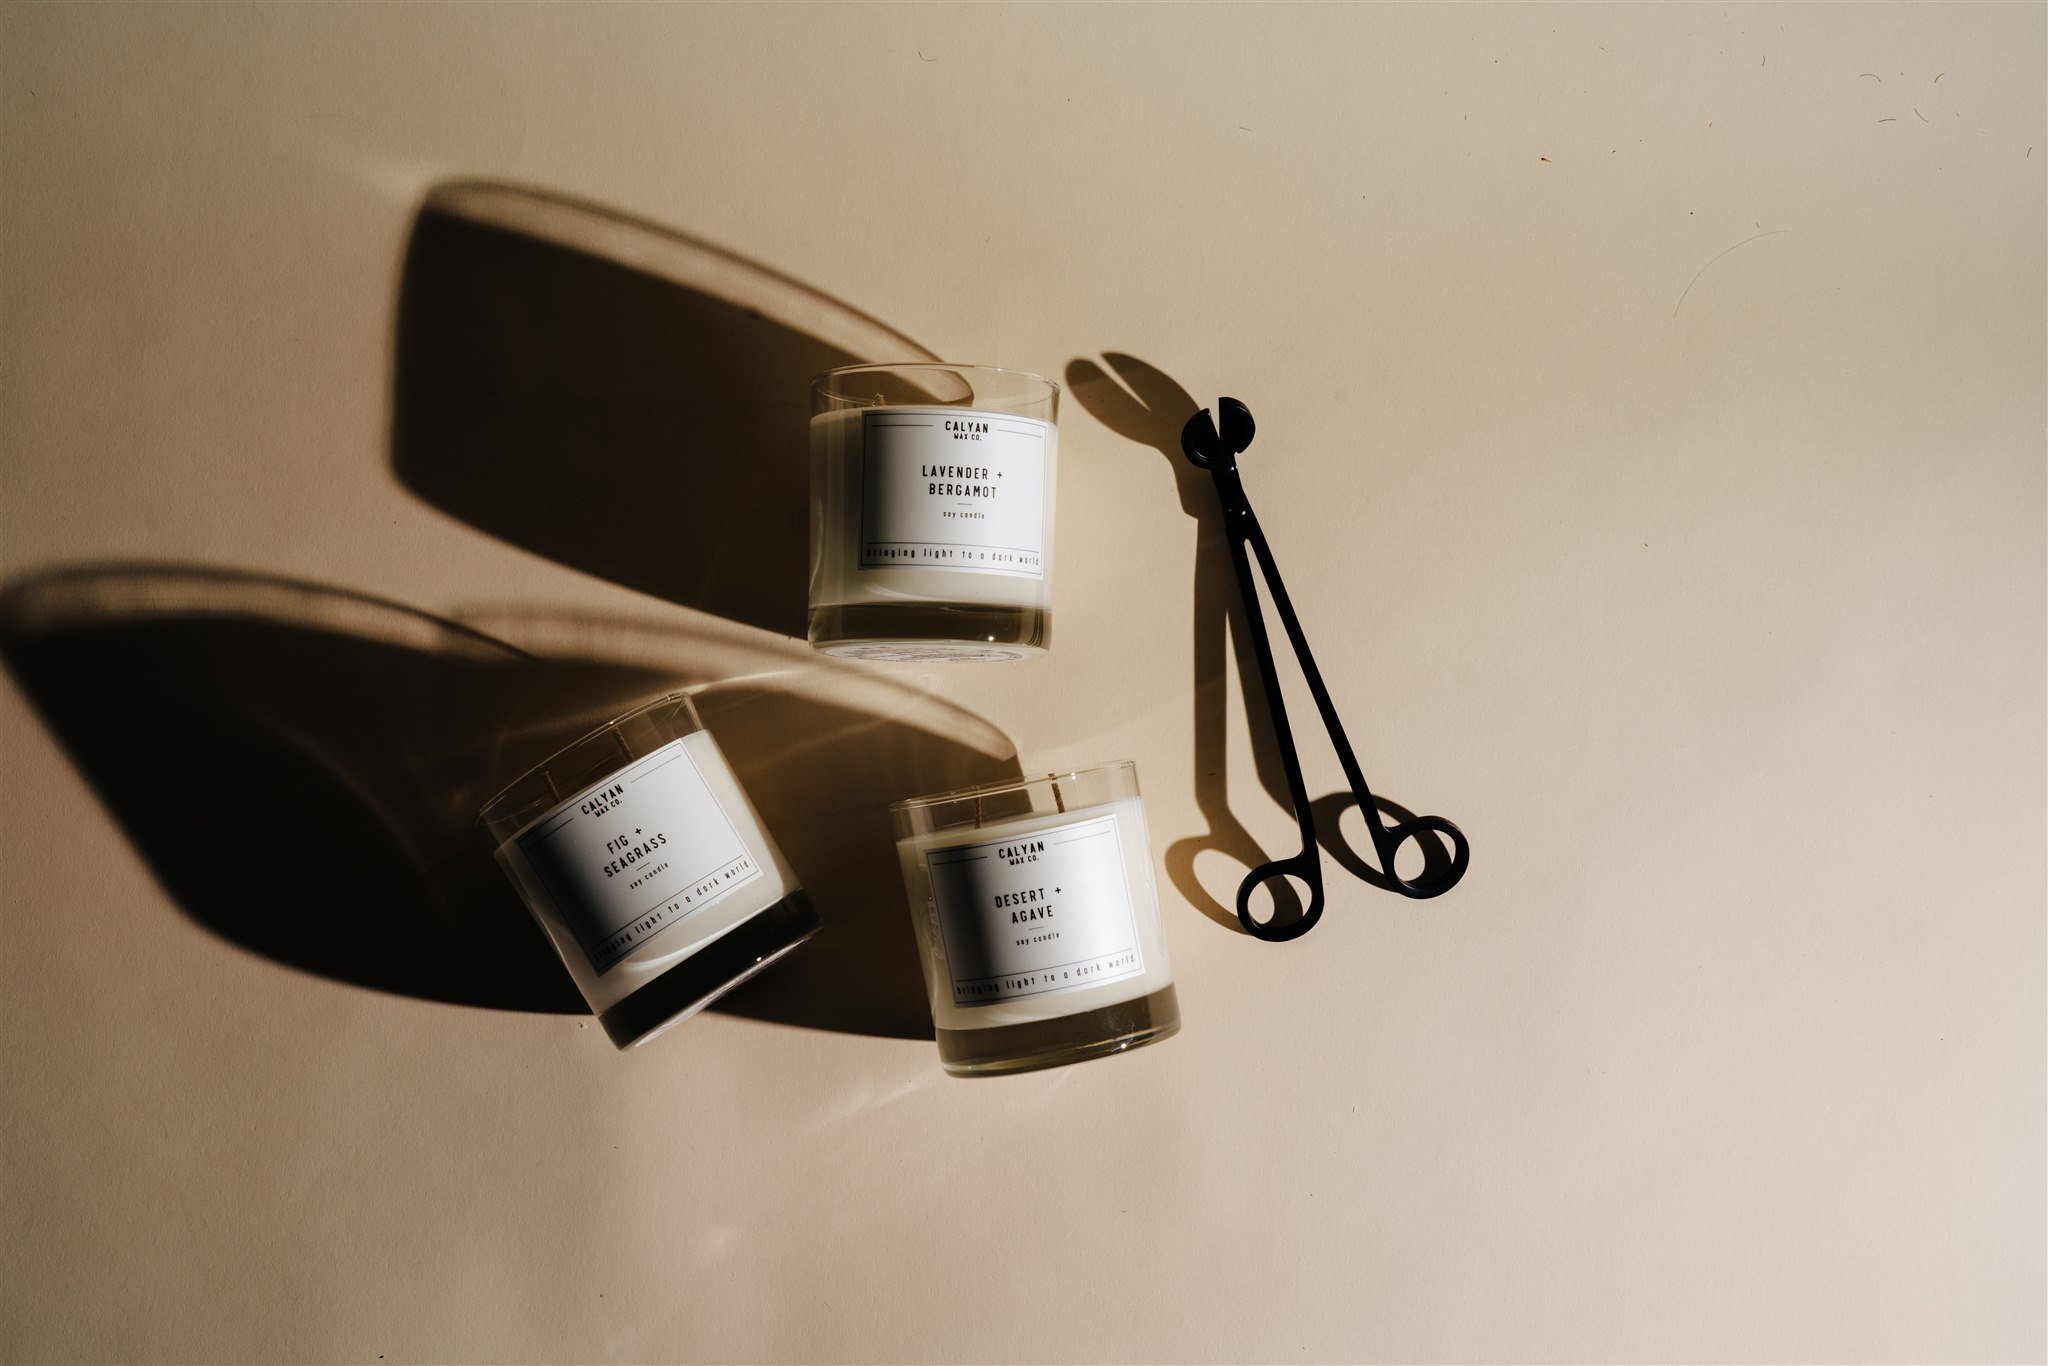 Soy Candle Fig + Seagrass Tin | Calyan Wax Co.